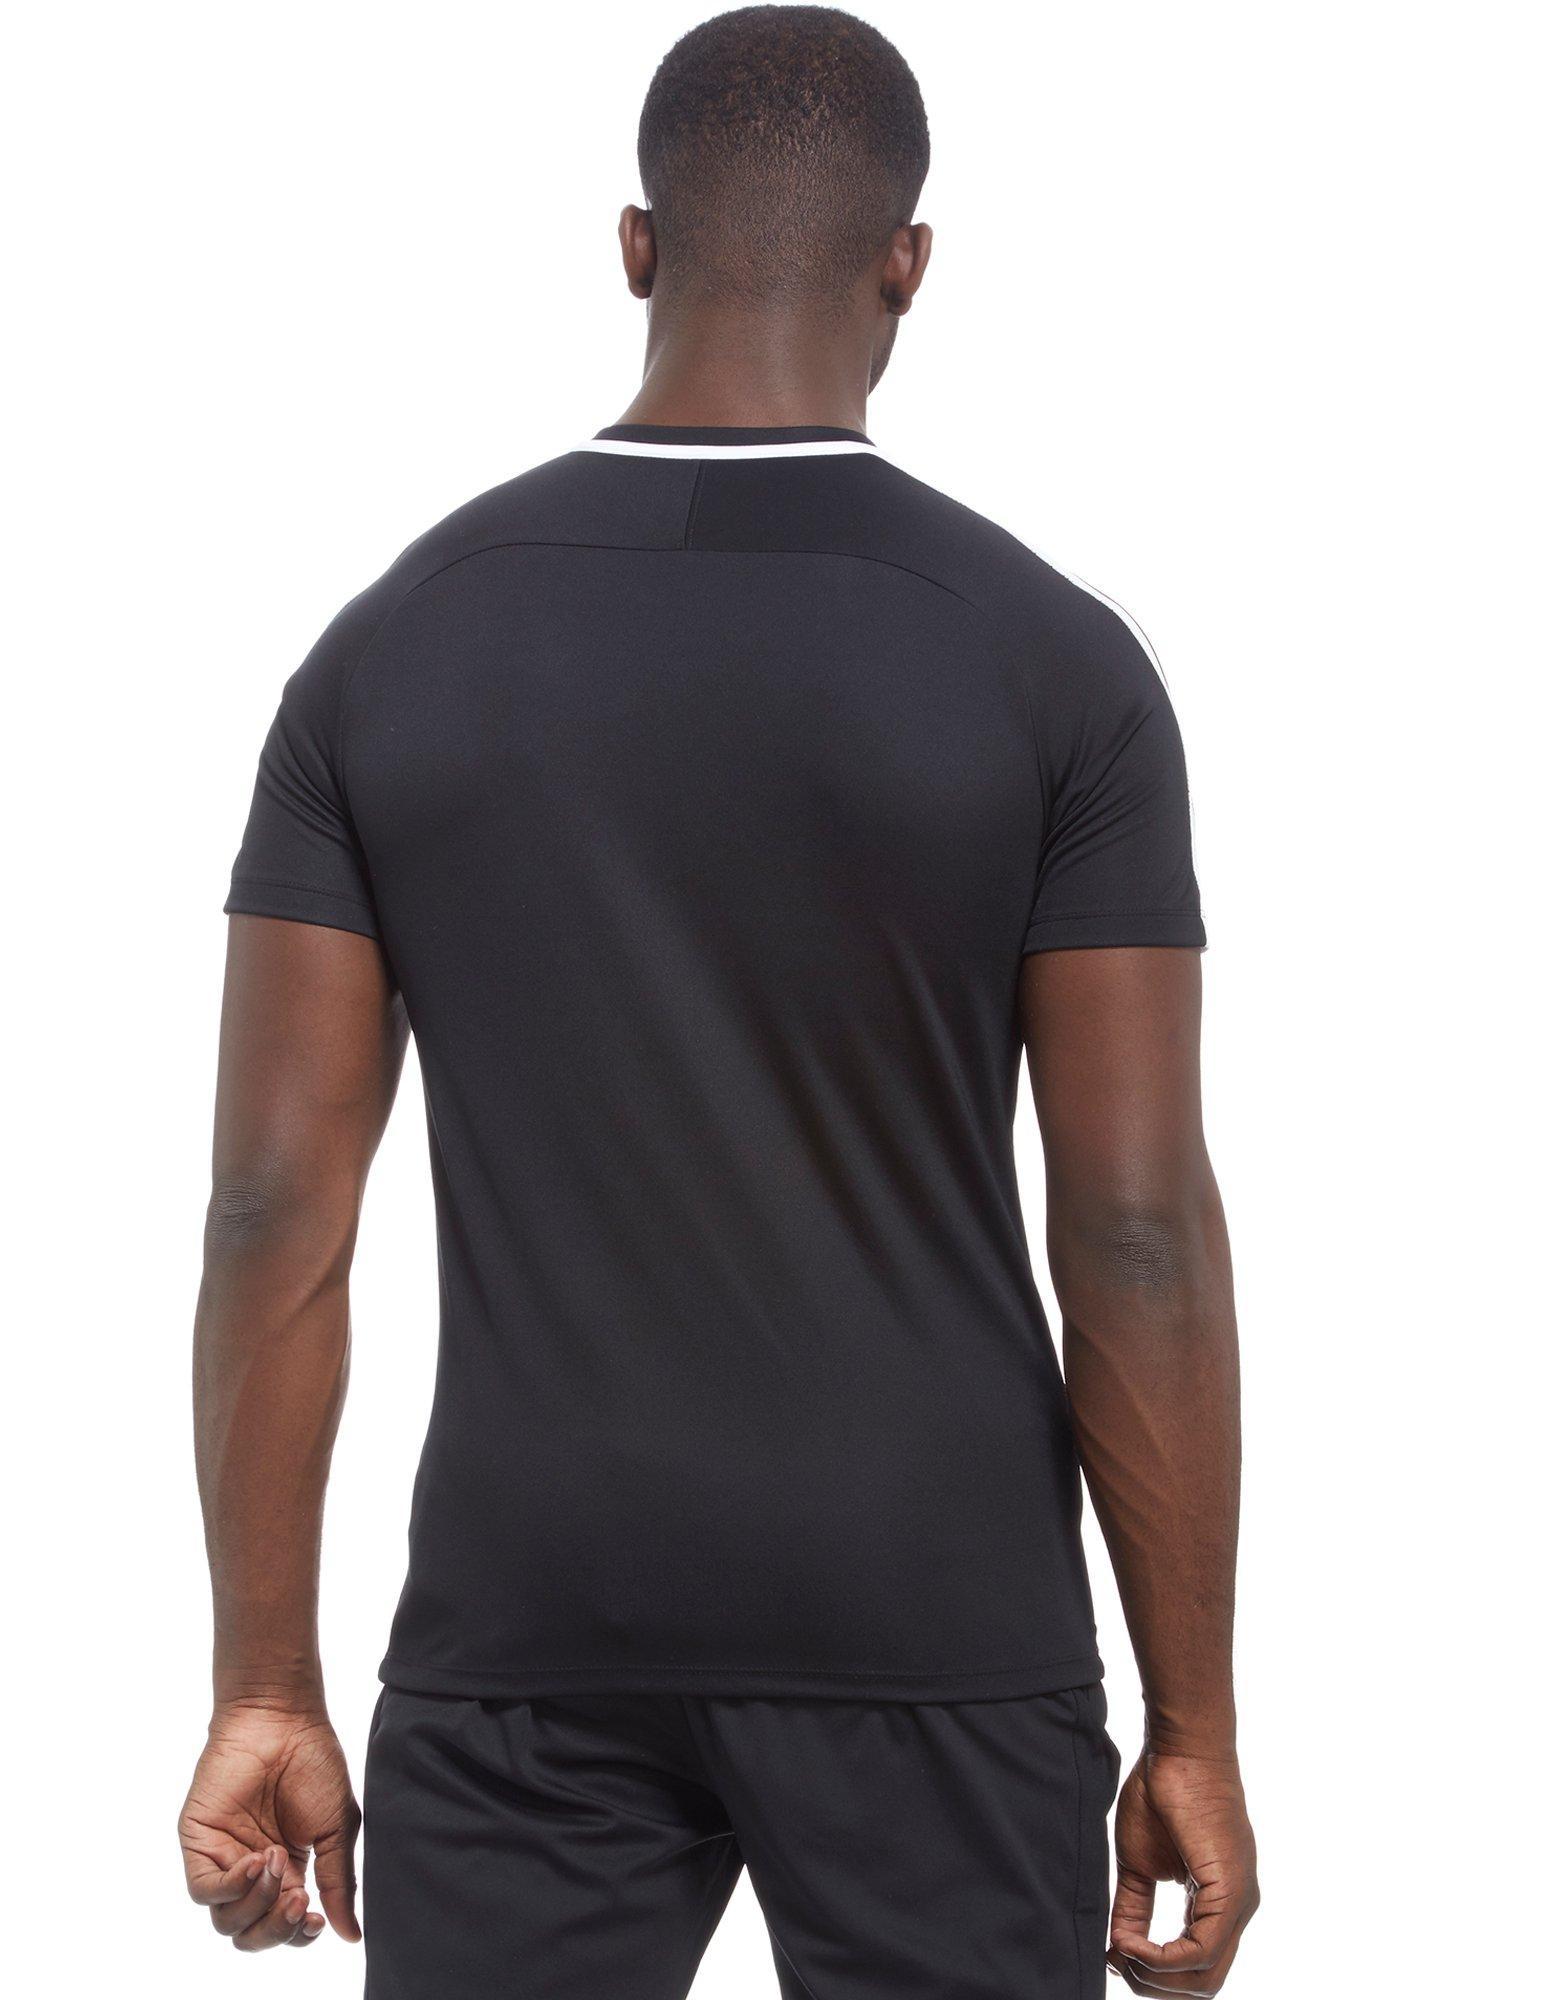 Lyst - Nike Dry Academy T-shirt in Black for Men